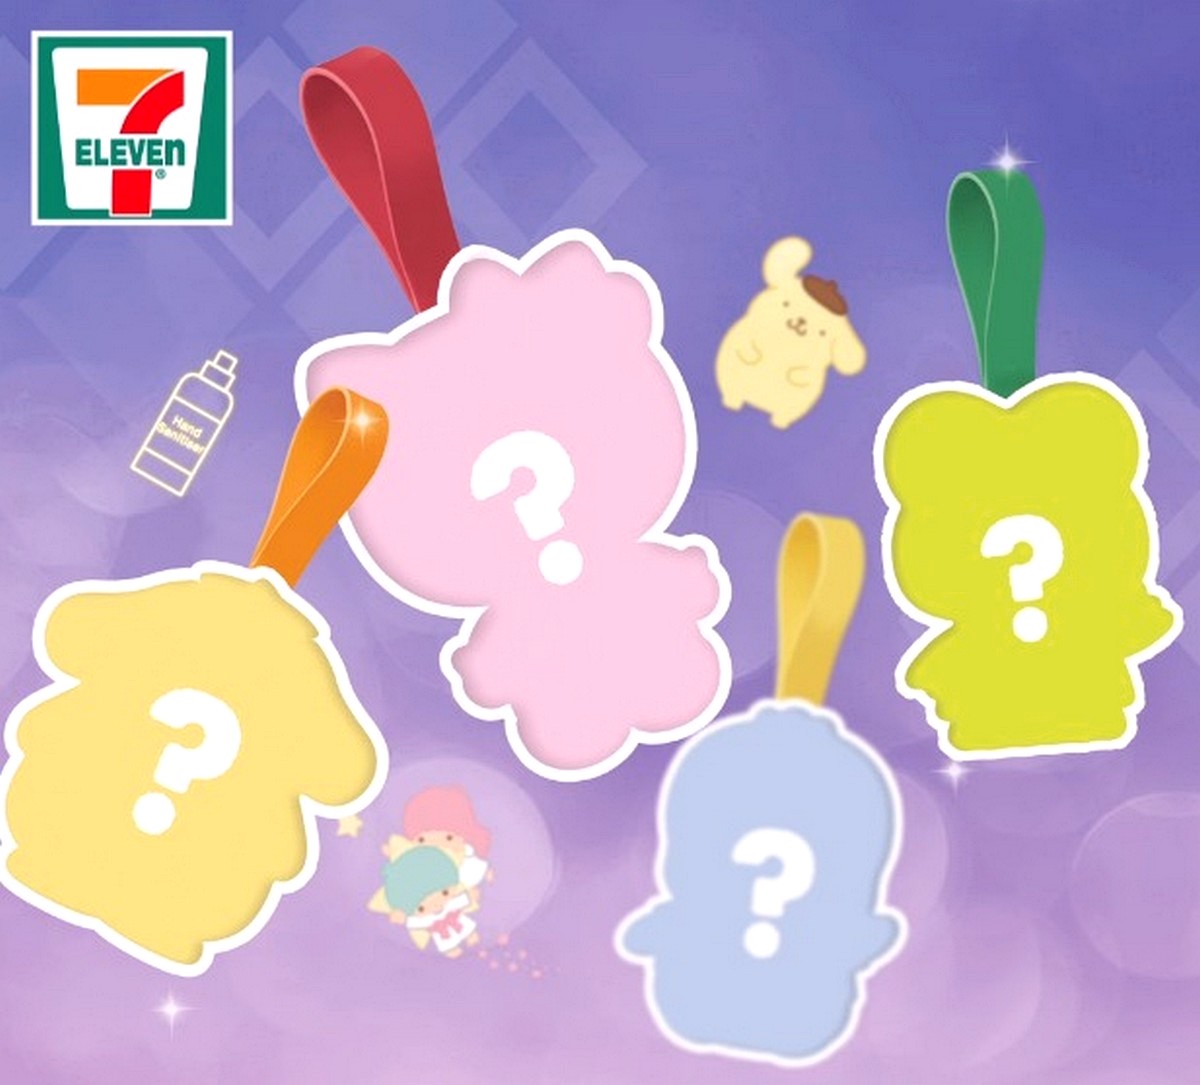 7-Eleven-Singapore-teams-up-with-8-popular-Sanrio-characters-to-launch-a-Mini-Pouch-Collectible-Programme-Little-Baubles-of-Joy-01 9 Jun-10 Aug 2021: Redeem & Collect All 8 Famous Sanrio Characters Silicone Mini Pouches at 7 Eleven Singapore Islandwide! Featuring Hello Kitty, My Melody & More!